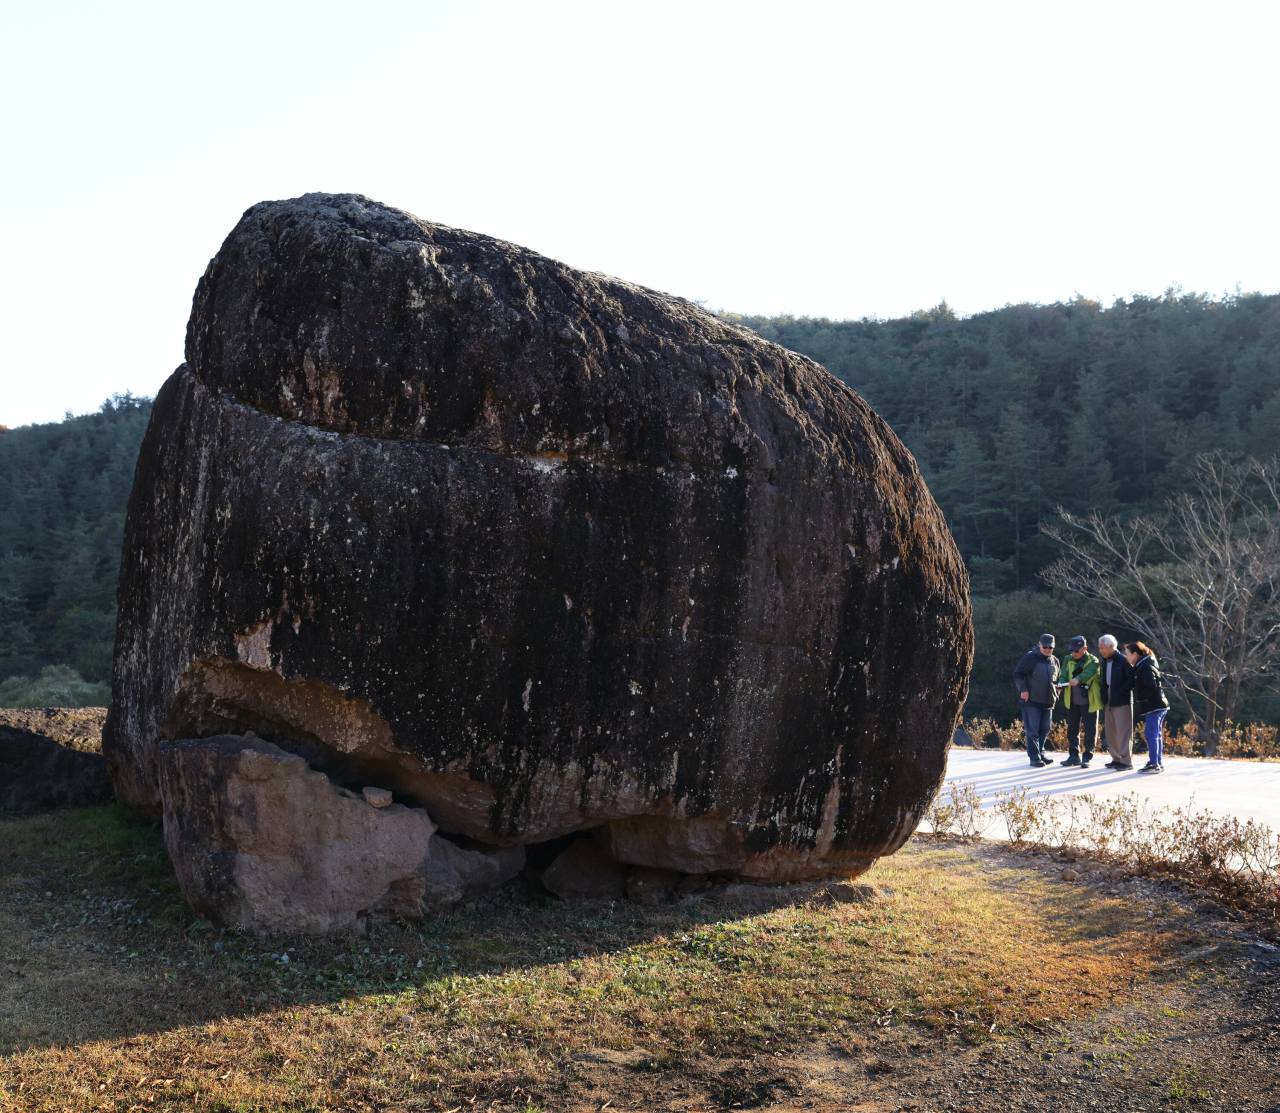 Visitors are dwarfed next to the Pingmaebawi Dolmen, which weighs approximately 200 tons, in Hwasun Dolmen site in South Jeolla Province. Photo © Hyungwon Kang